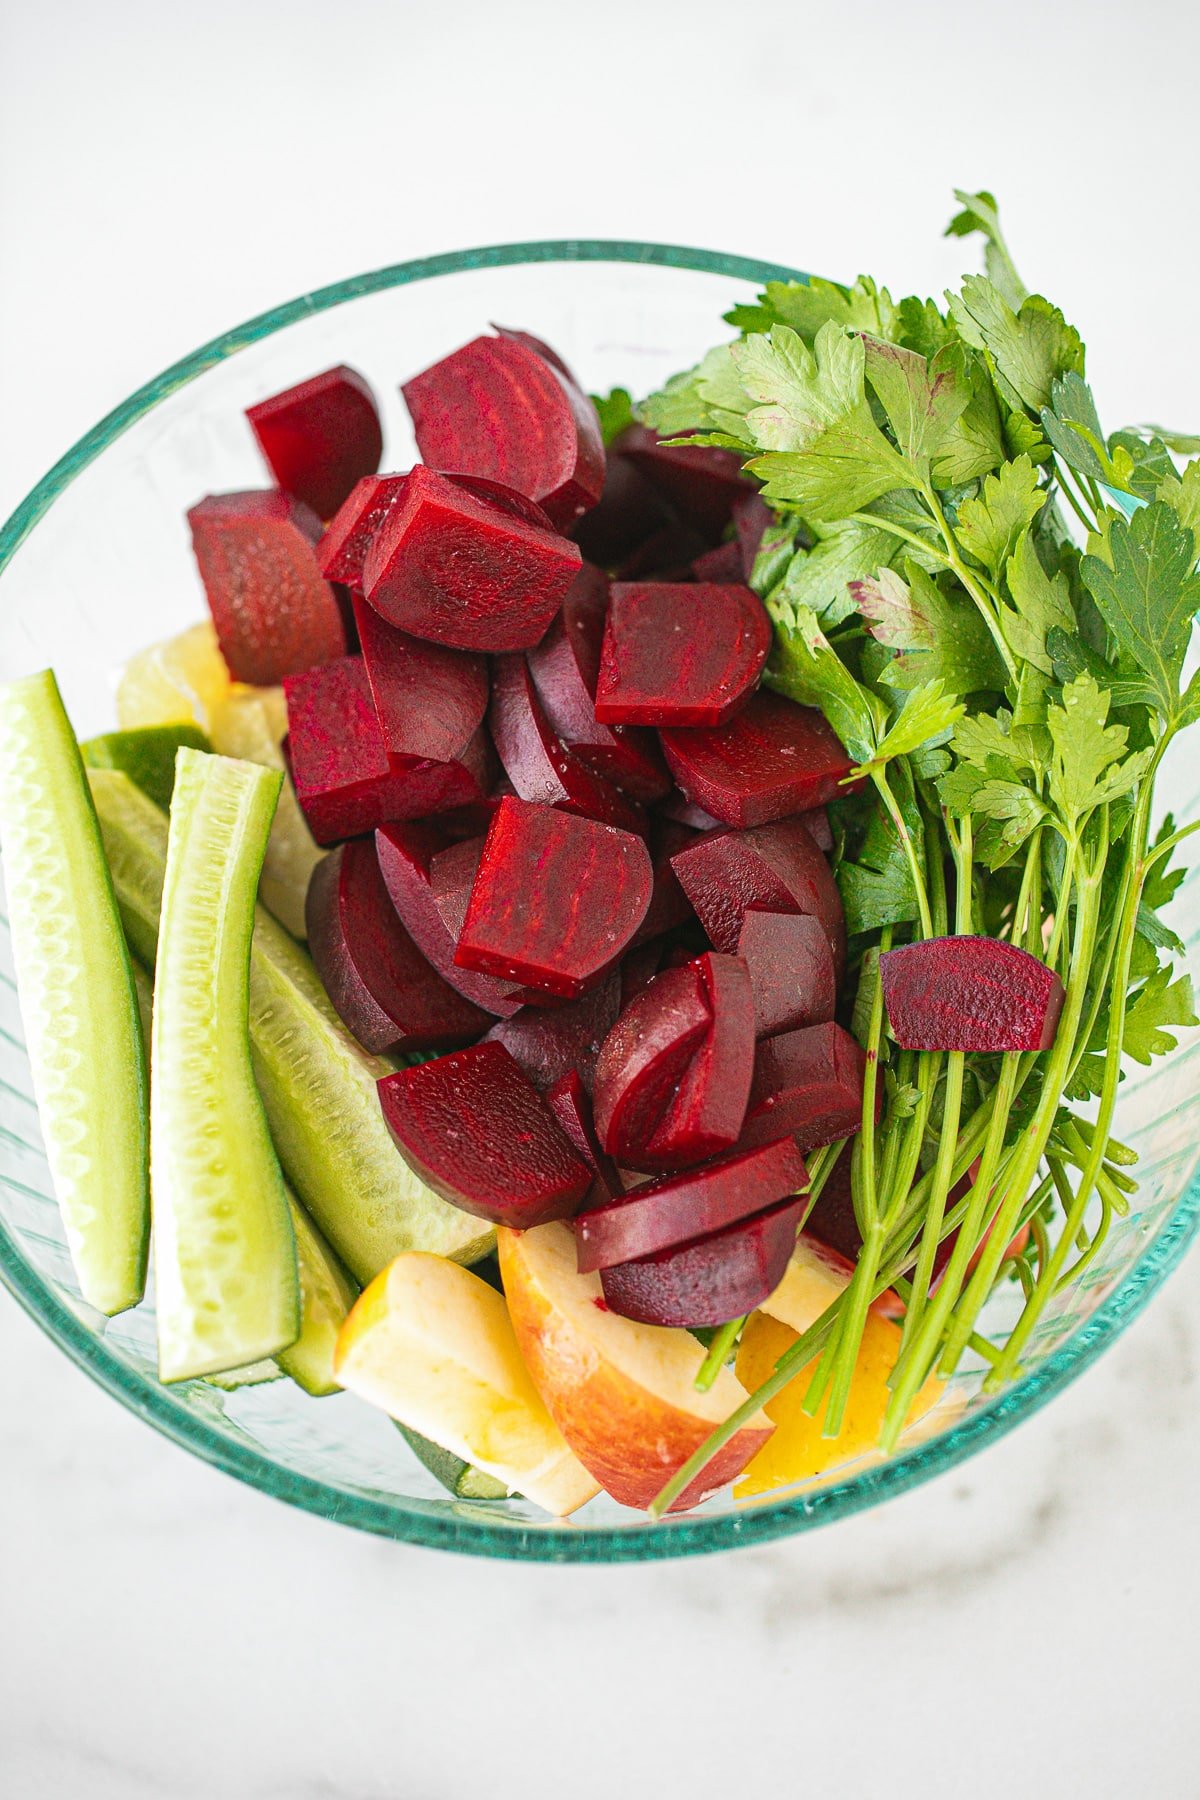 chopped beets and other vegetables in a bowl ready to be juiced